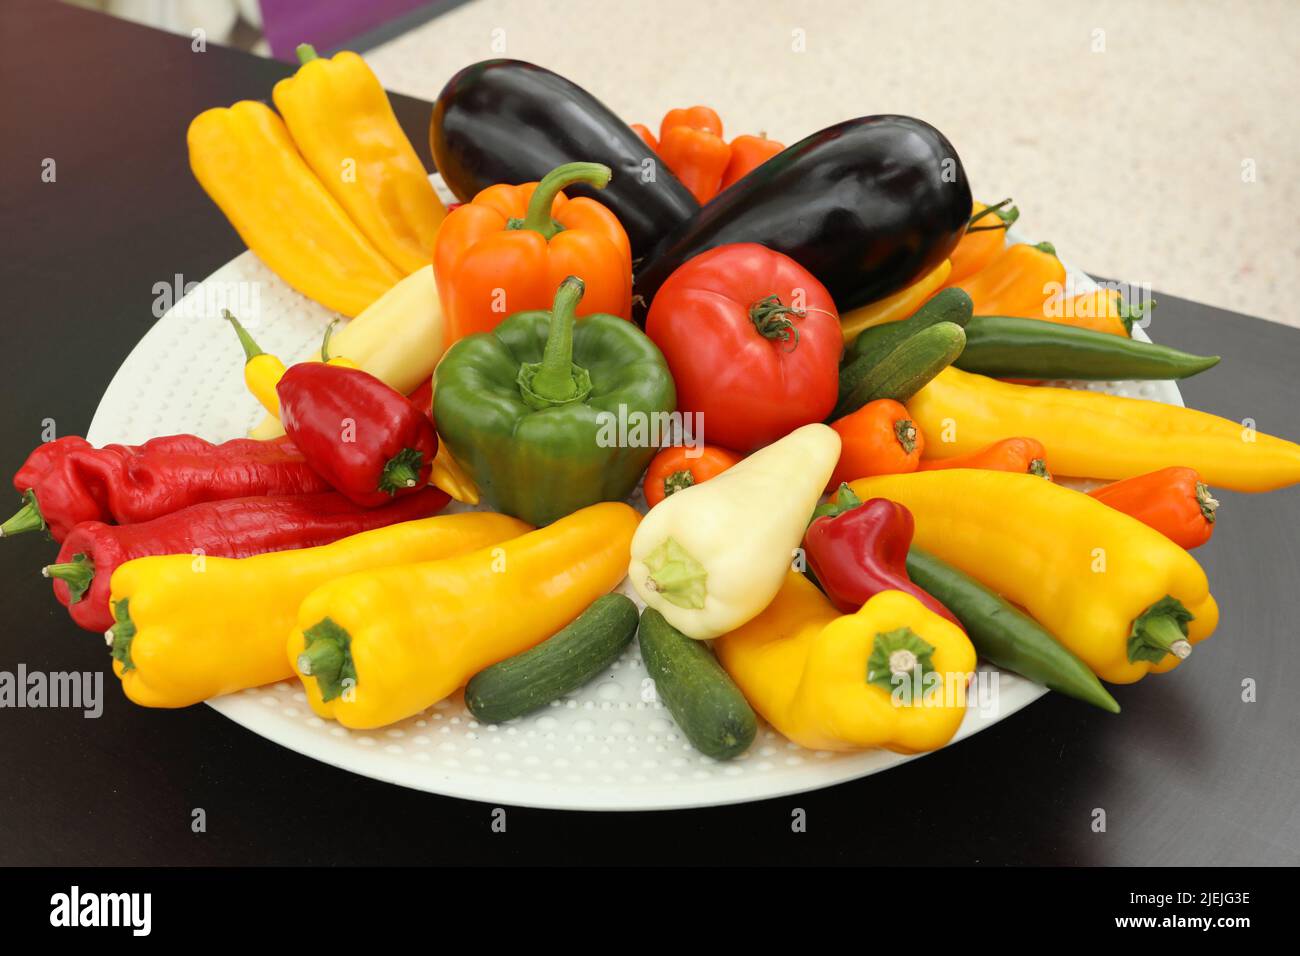 White plate of veggies with Bell peppers, yellow pepper, aubergine on a black table Stock Photo